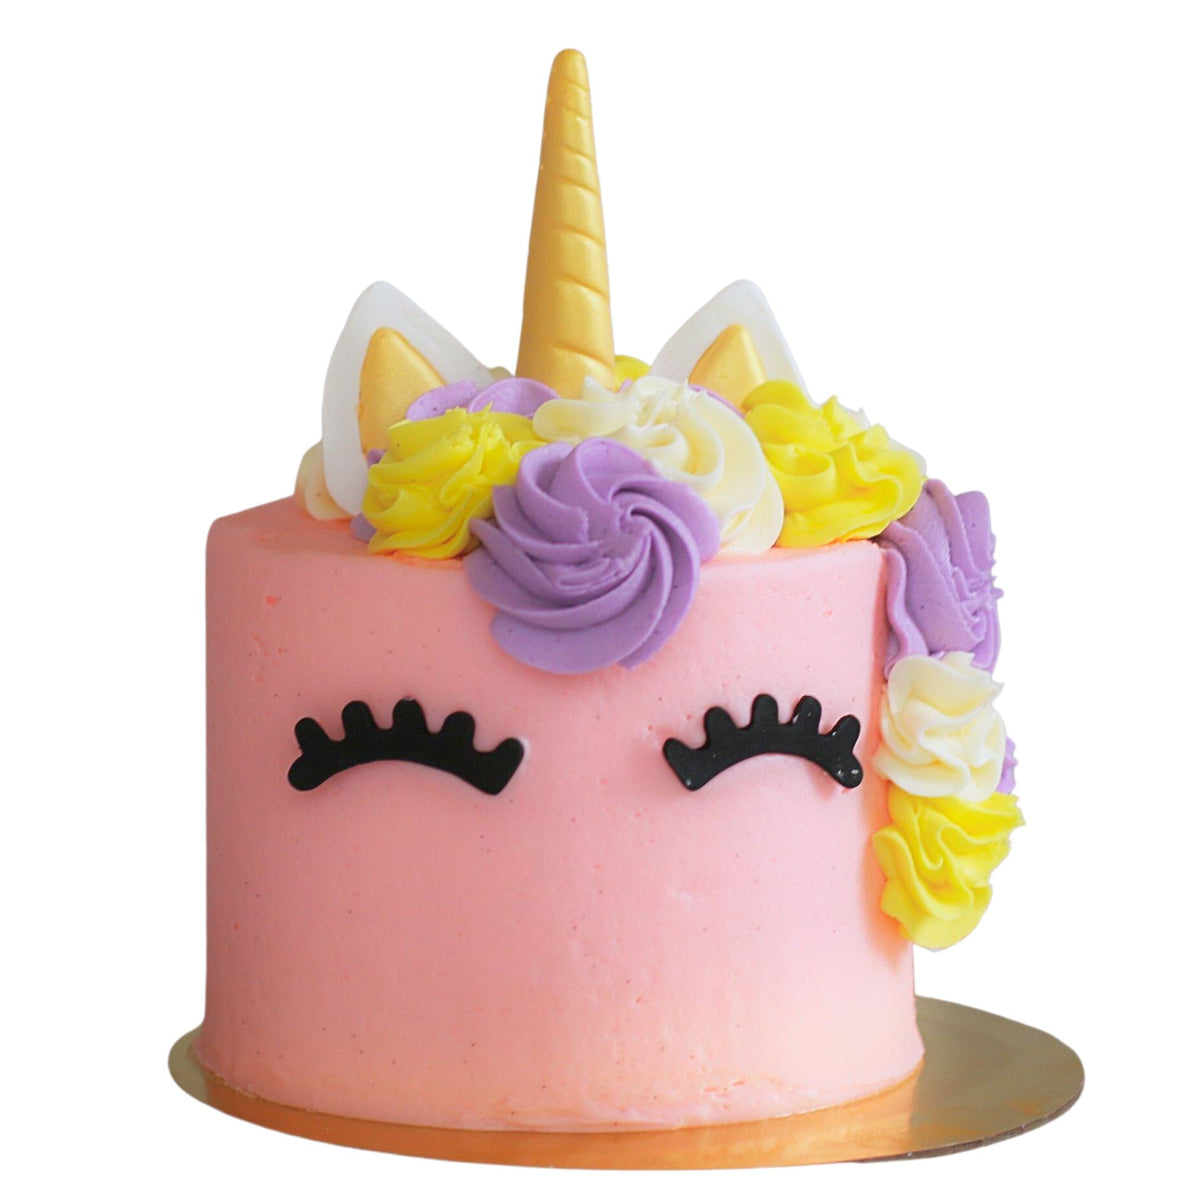 The Unicorn Cake in Pink Cakes The Cupcake Queens 